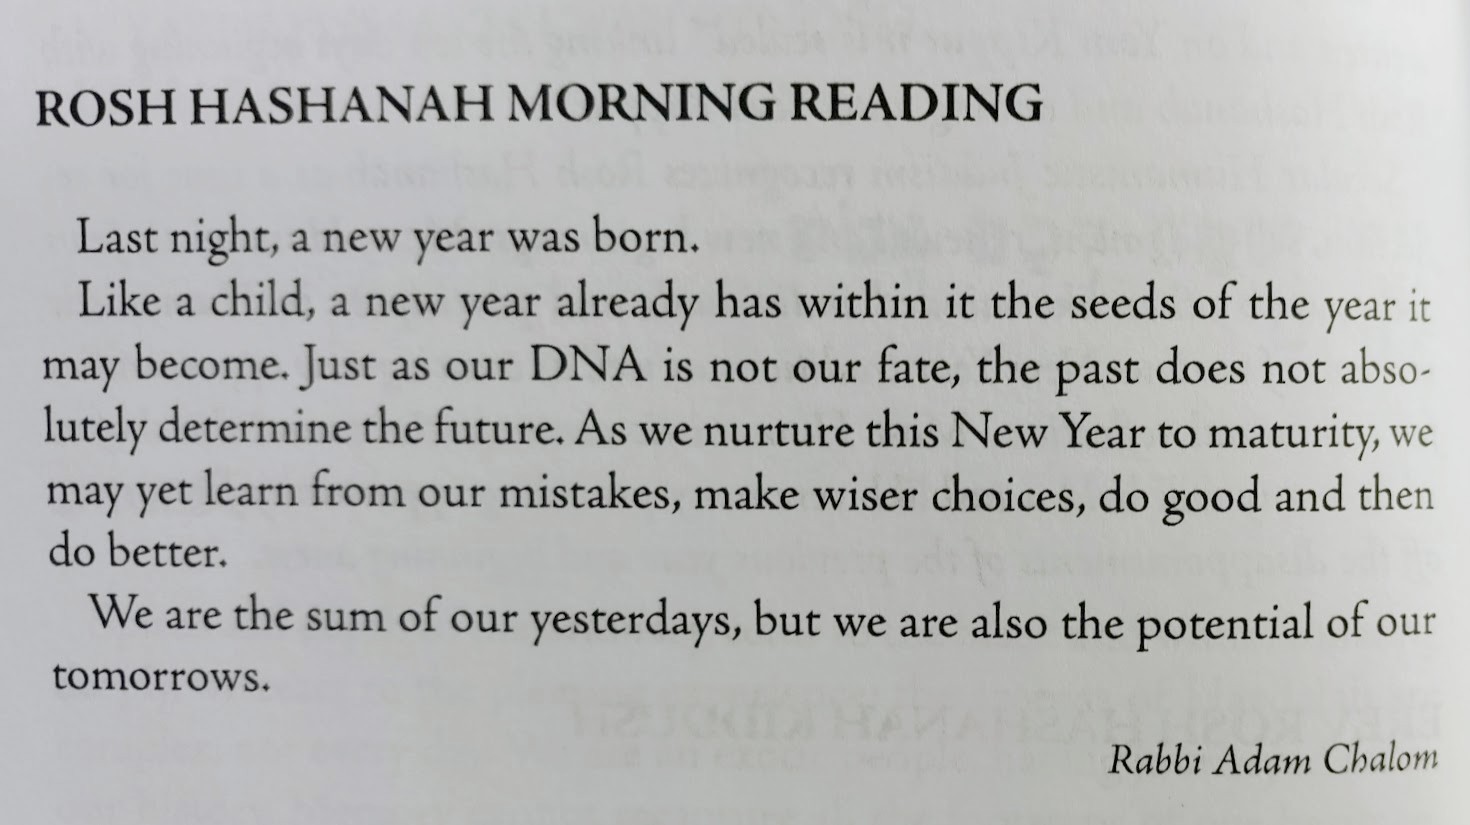 Rosh Hashanah Morning Reading
Last night, a new year was born. Like a child, a new year already has within it the seeds of the year it may become. Just as a our DNA is not our fate, the past does not absolutely determine the future. As we nurture this New Year to maturity, we may yet learn from our mistakes, make wiser choices, do good and then do better. We are the sum of our yesterdays, but we are also the potential of our tomorrows. - Rabbi Adam Chalom